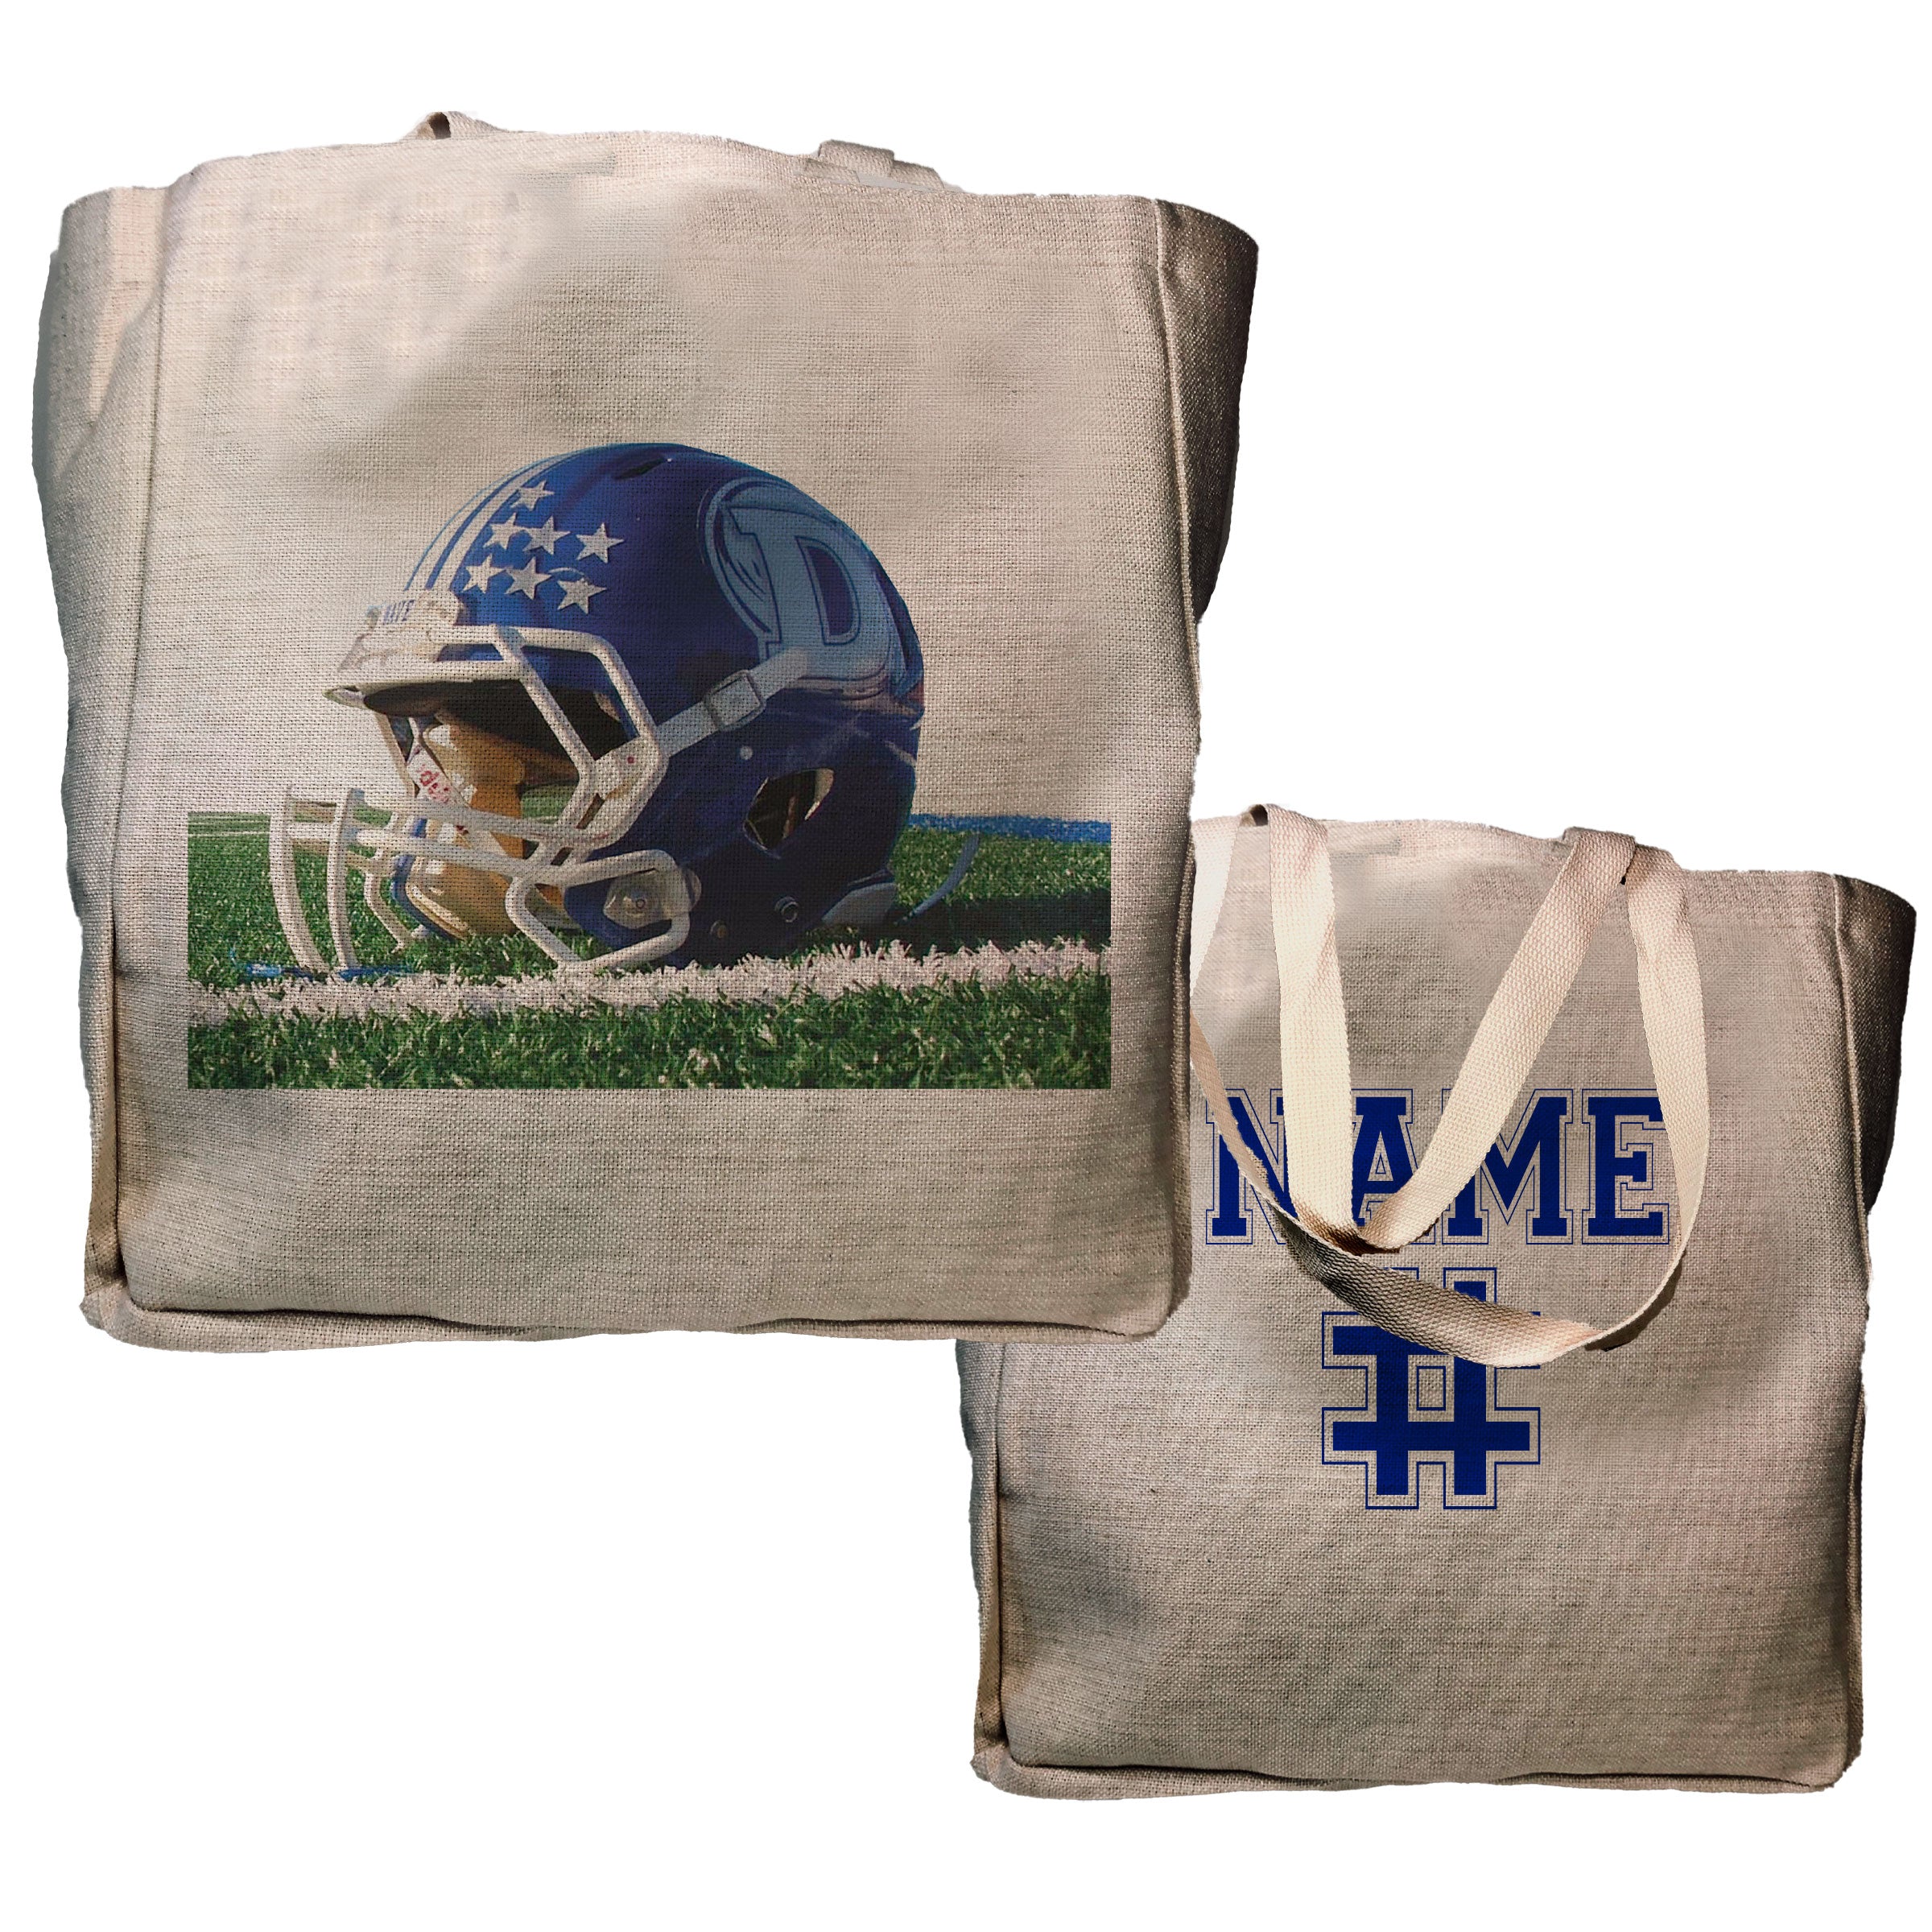 Blue Wave Football Tote - Name & Number